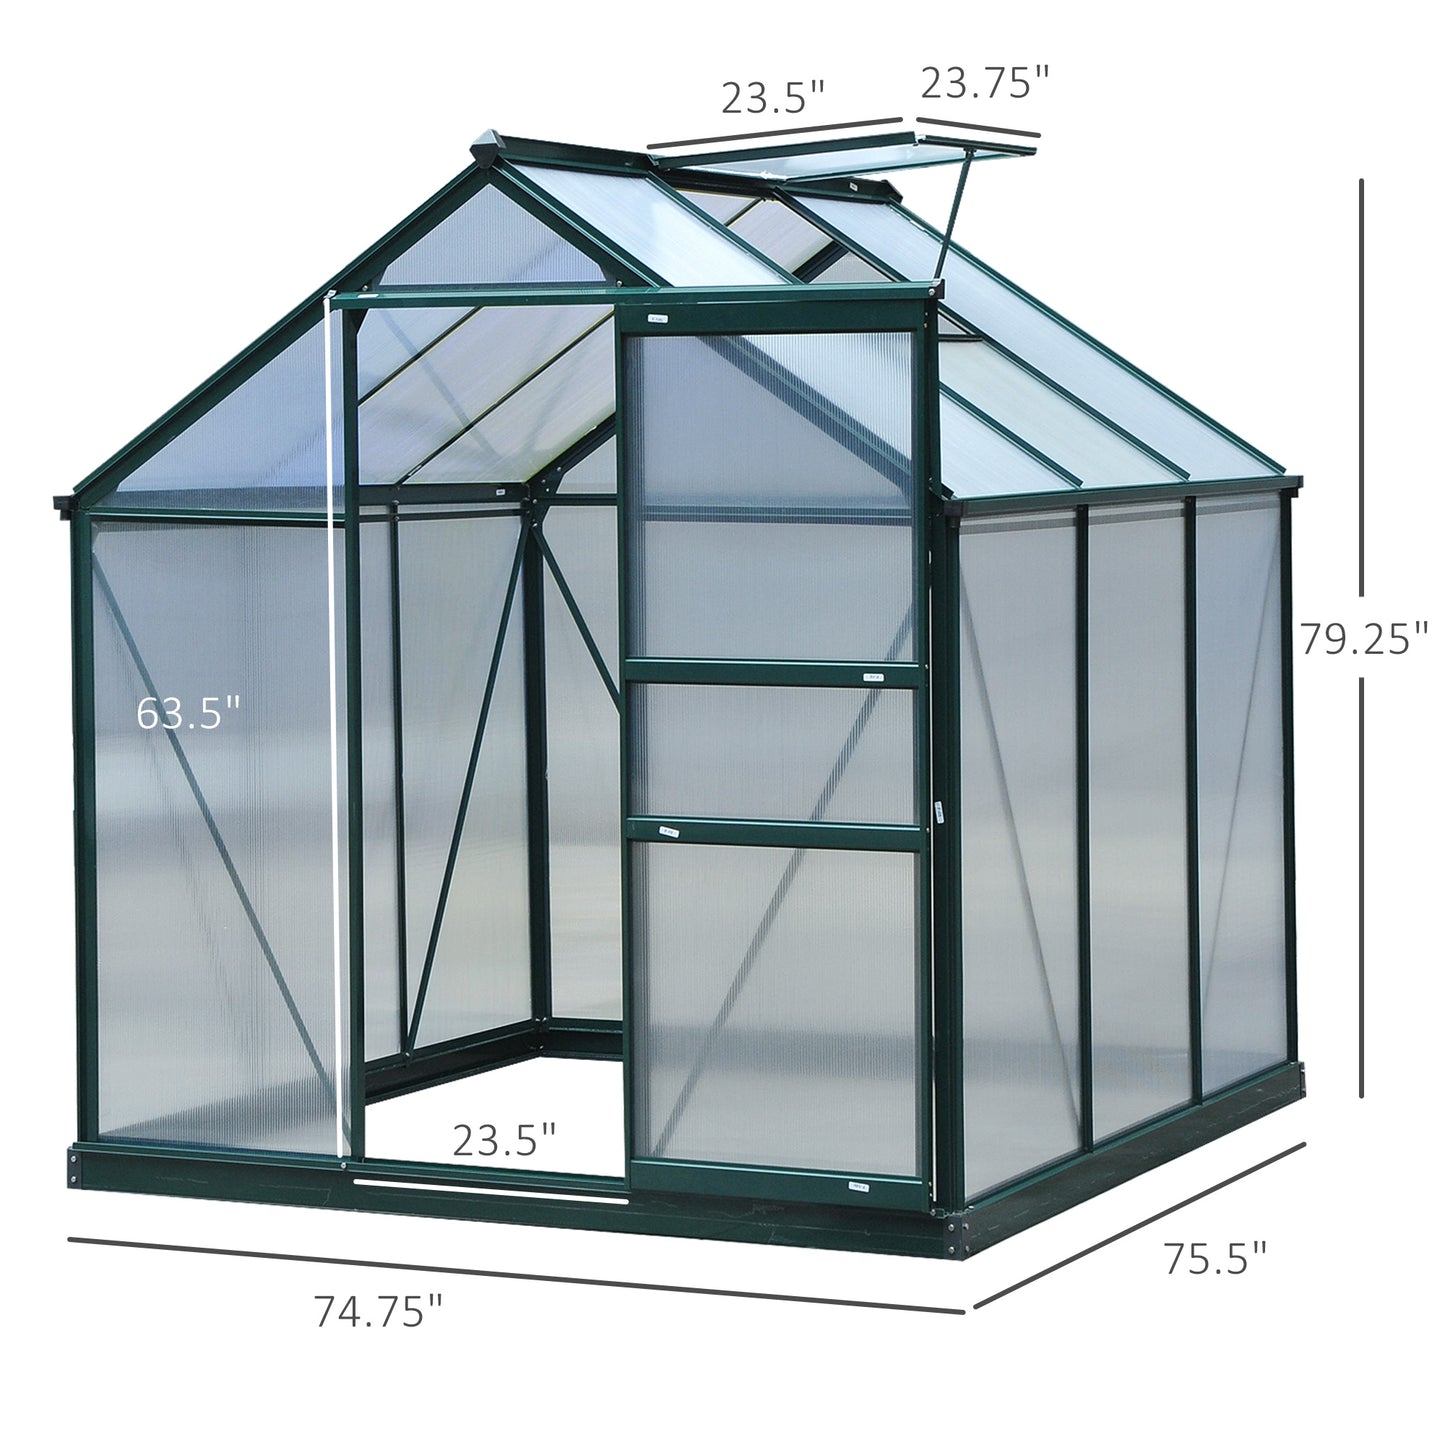 6.2' x 6.3' x 6.6' Clear Polycarbonate Greenhouse Large Walk-In Green House Garden Plants Grow Galvanized Base Aluminium Frame w/ Slide Door - Gallery Canada